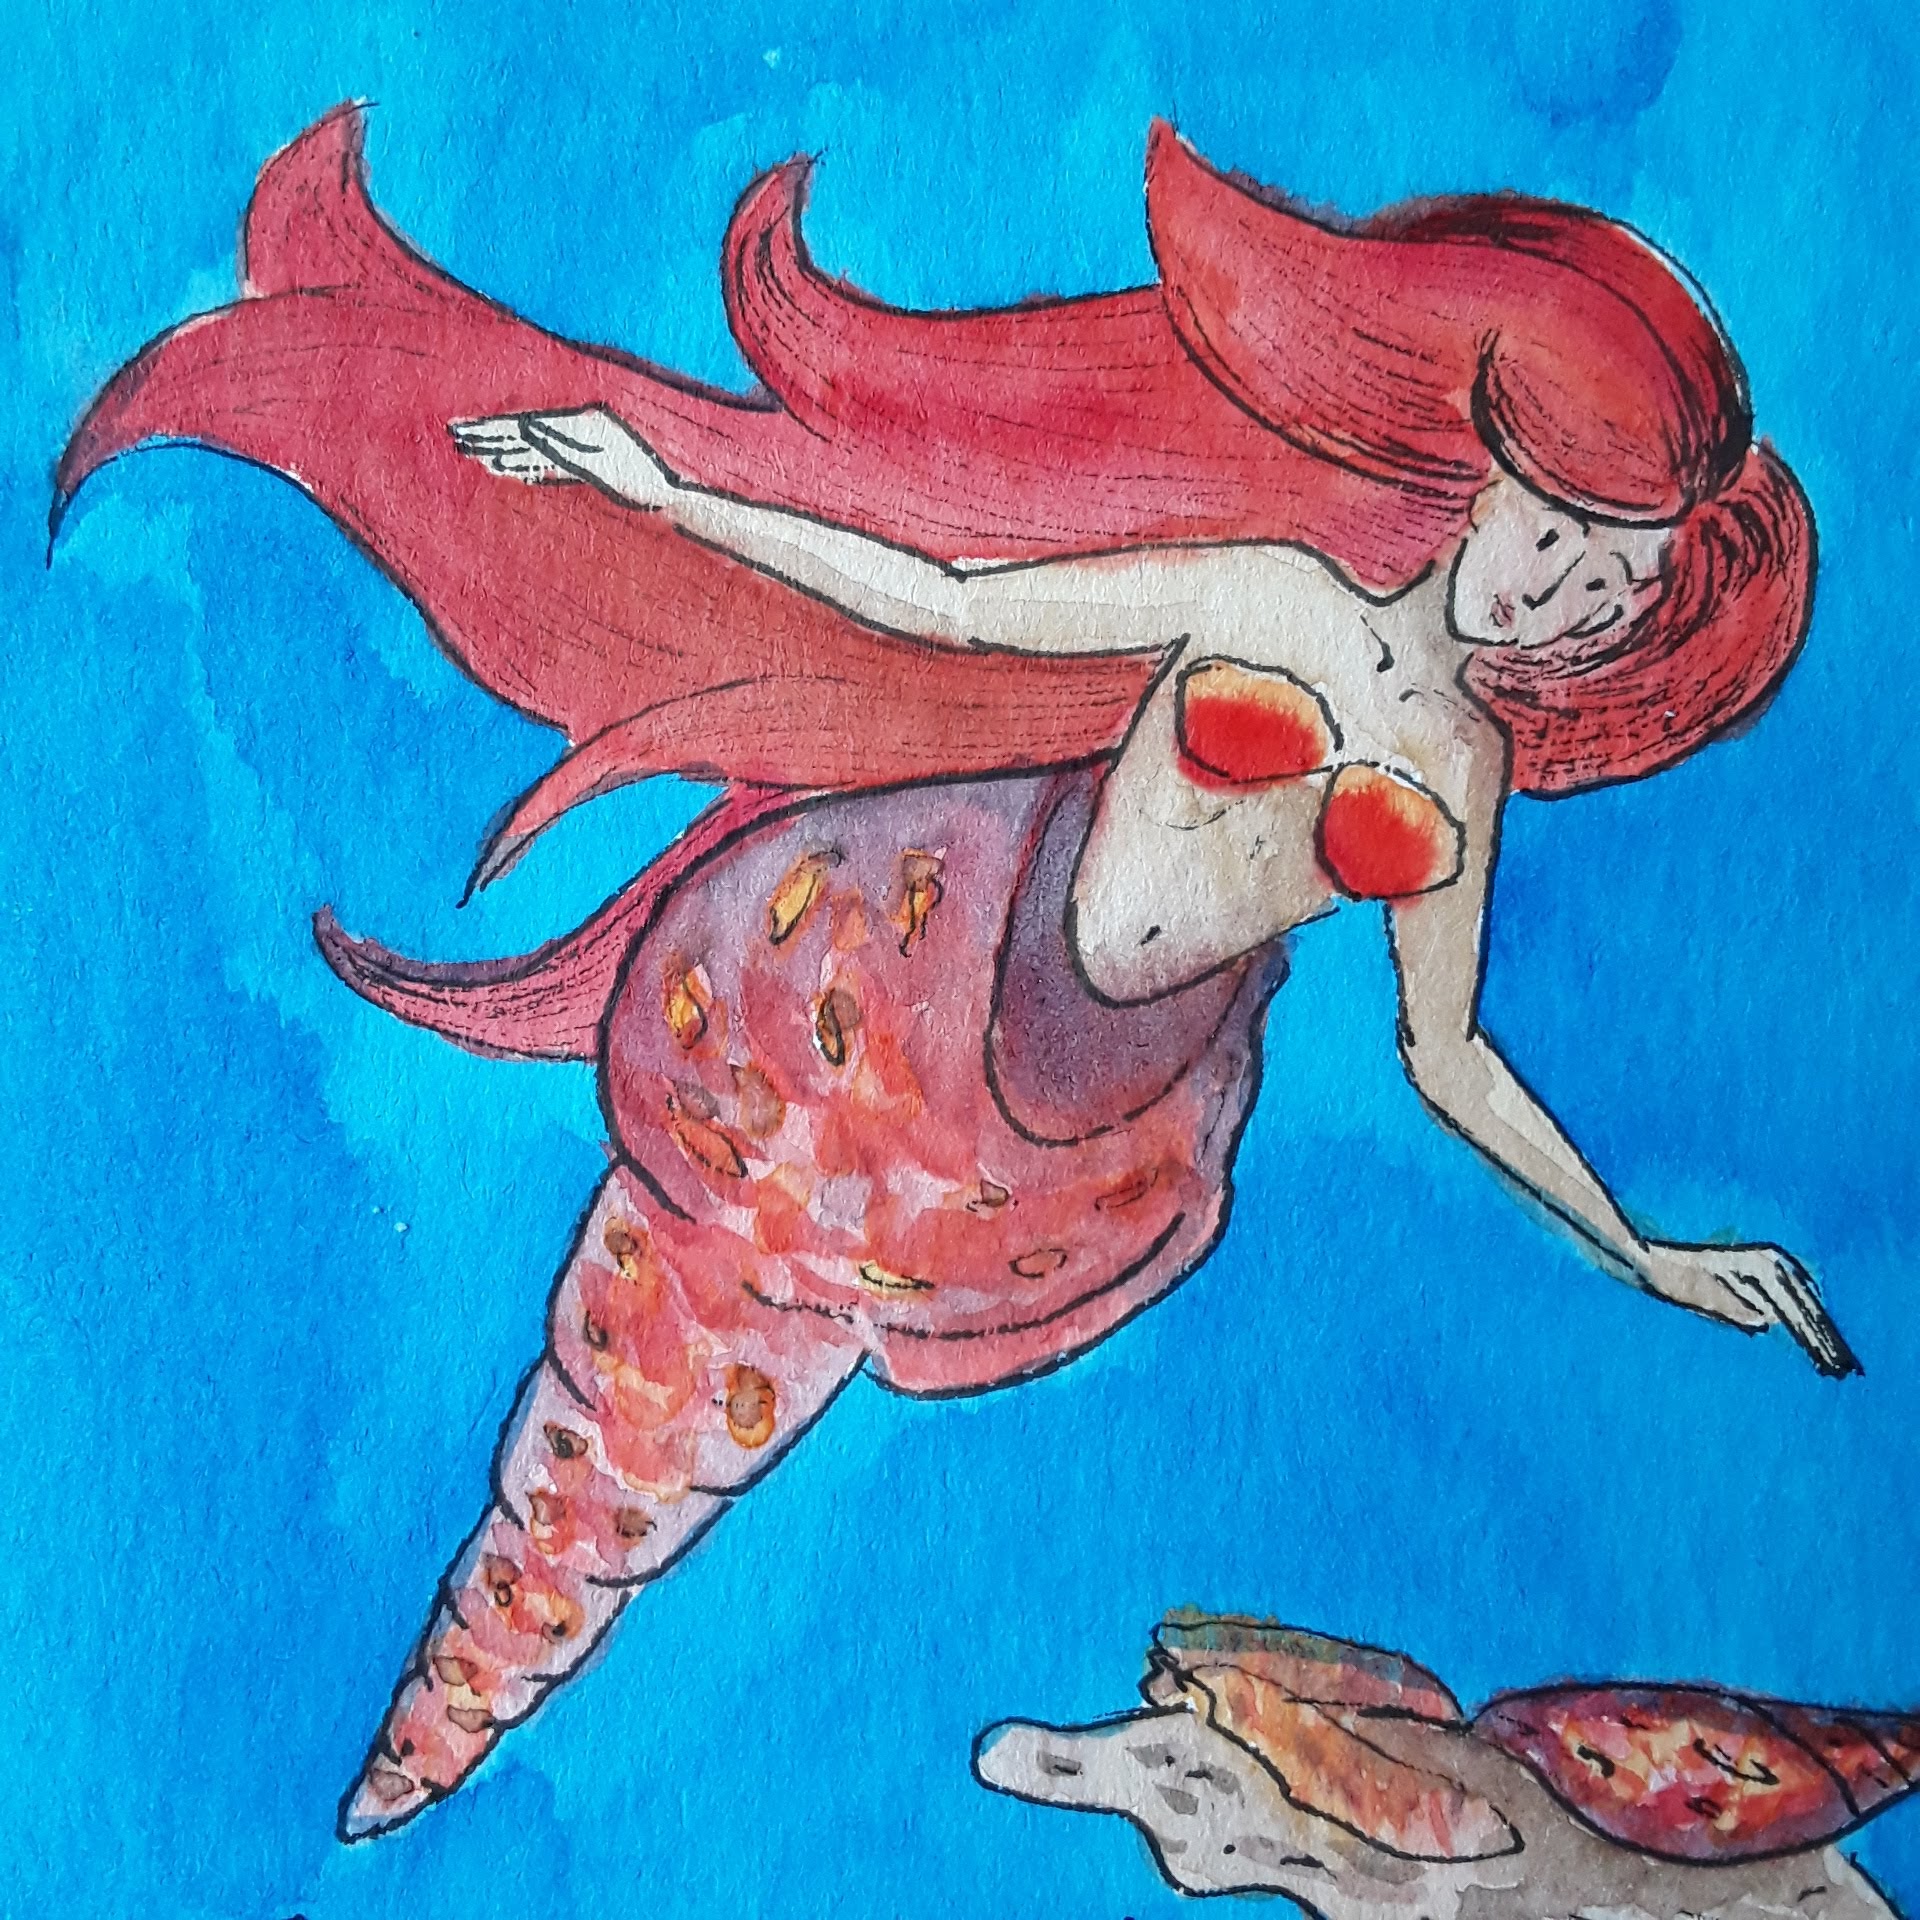 Mermay - my favourite challenge of them all!